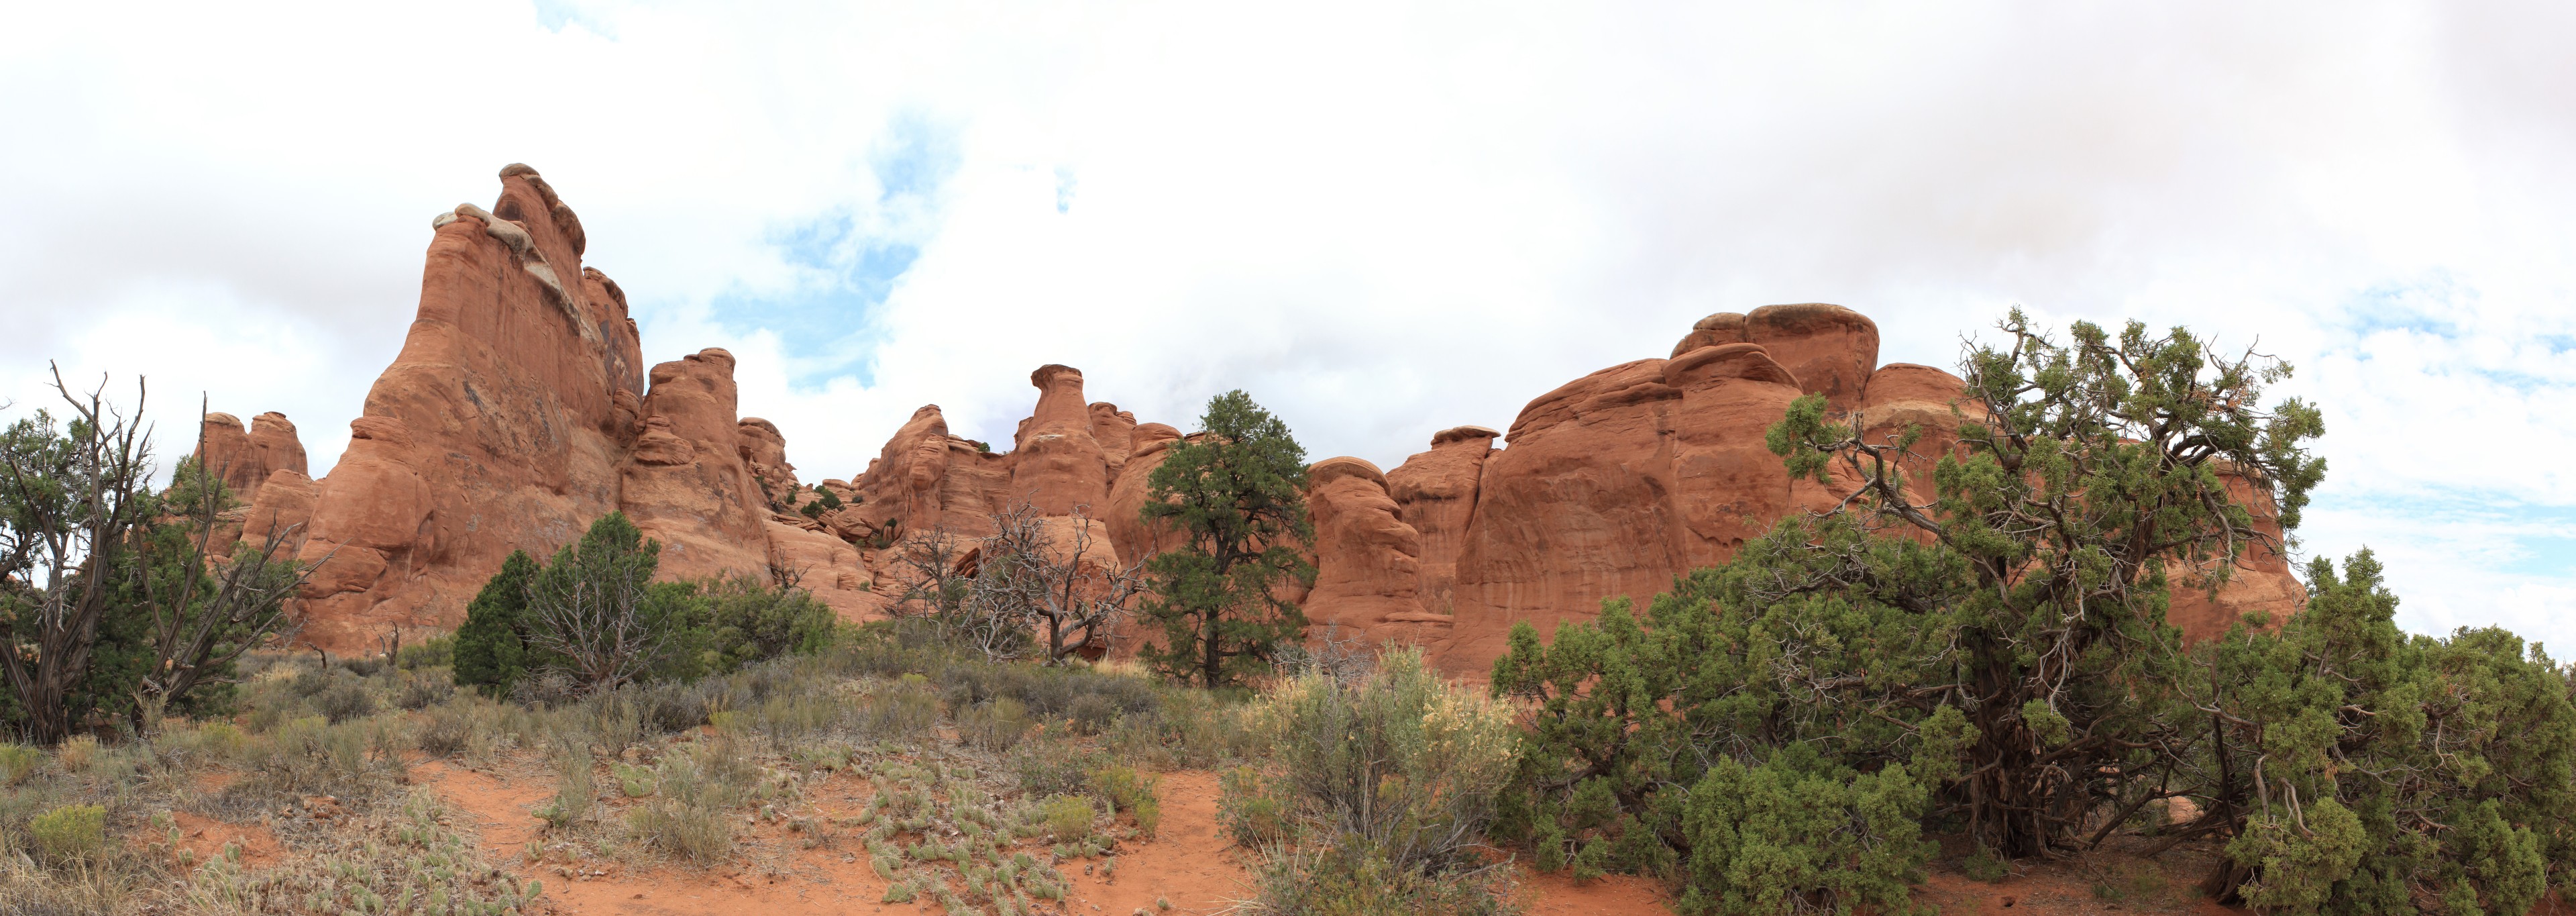 Picturesque setting along the trail to the Broken Arch. Pinyon pines, Utah Junipers, and the usual suspects from the desert vegetation line up. Backdrop of a set of fins just south of the campgrounds (closed in 2017).